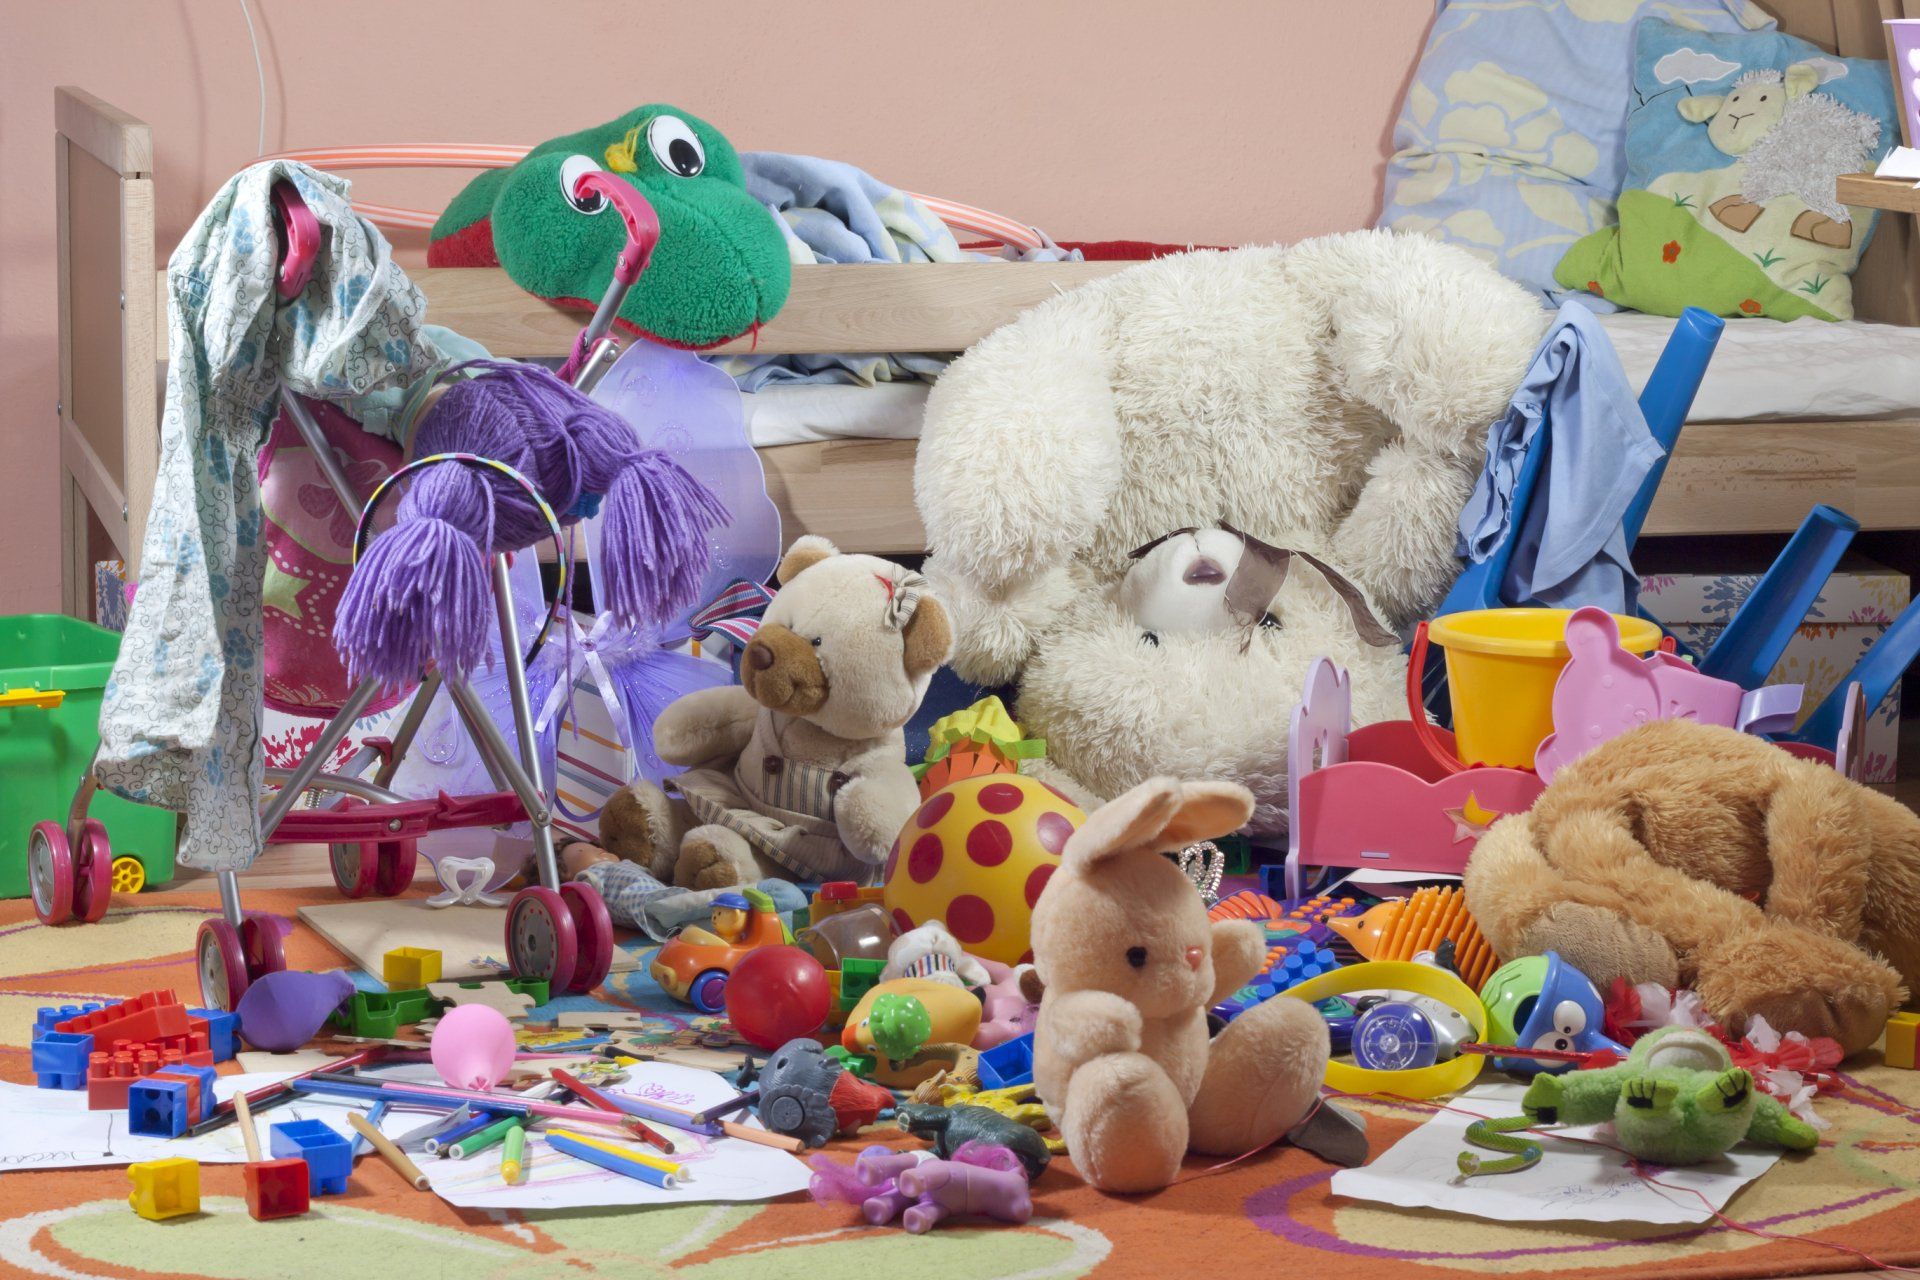 messy cluttered childs bedroom toys